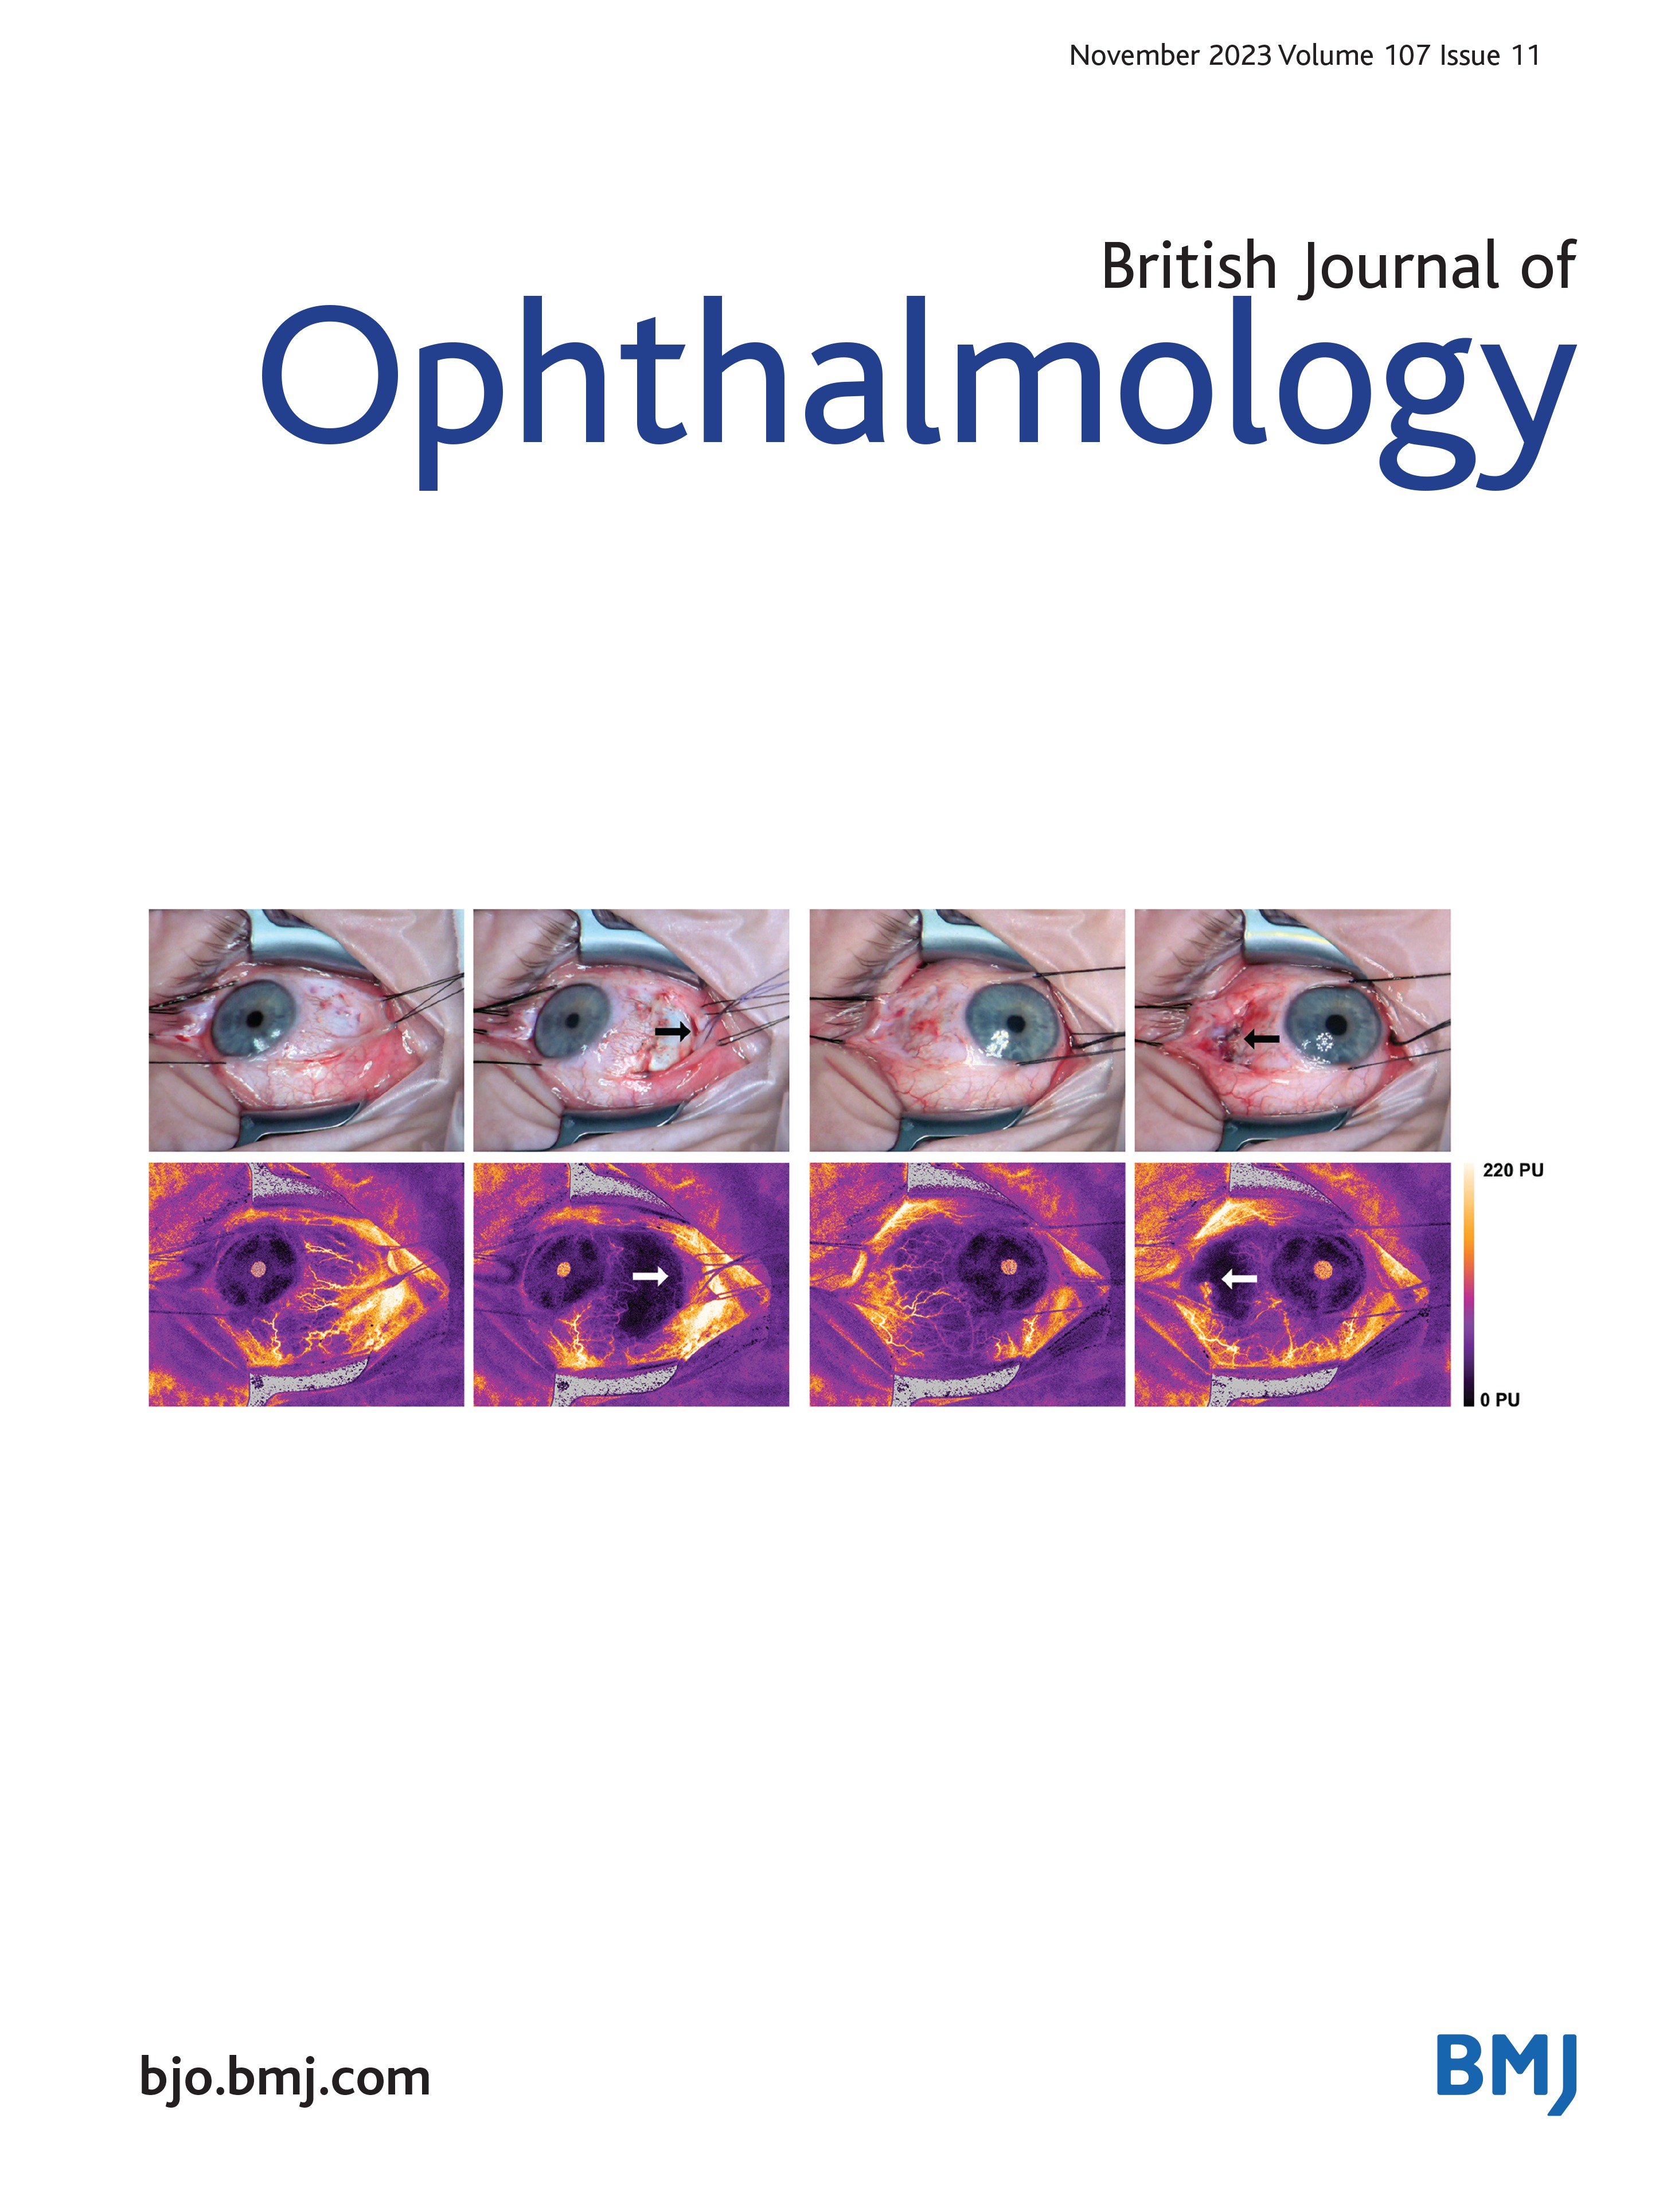 Association of macular OCT and OCTA parameters with visual acuity in glaucoma